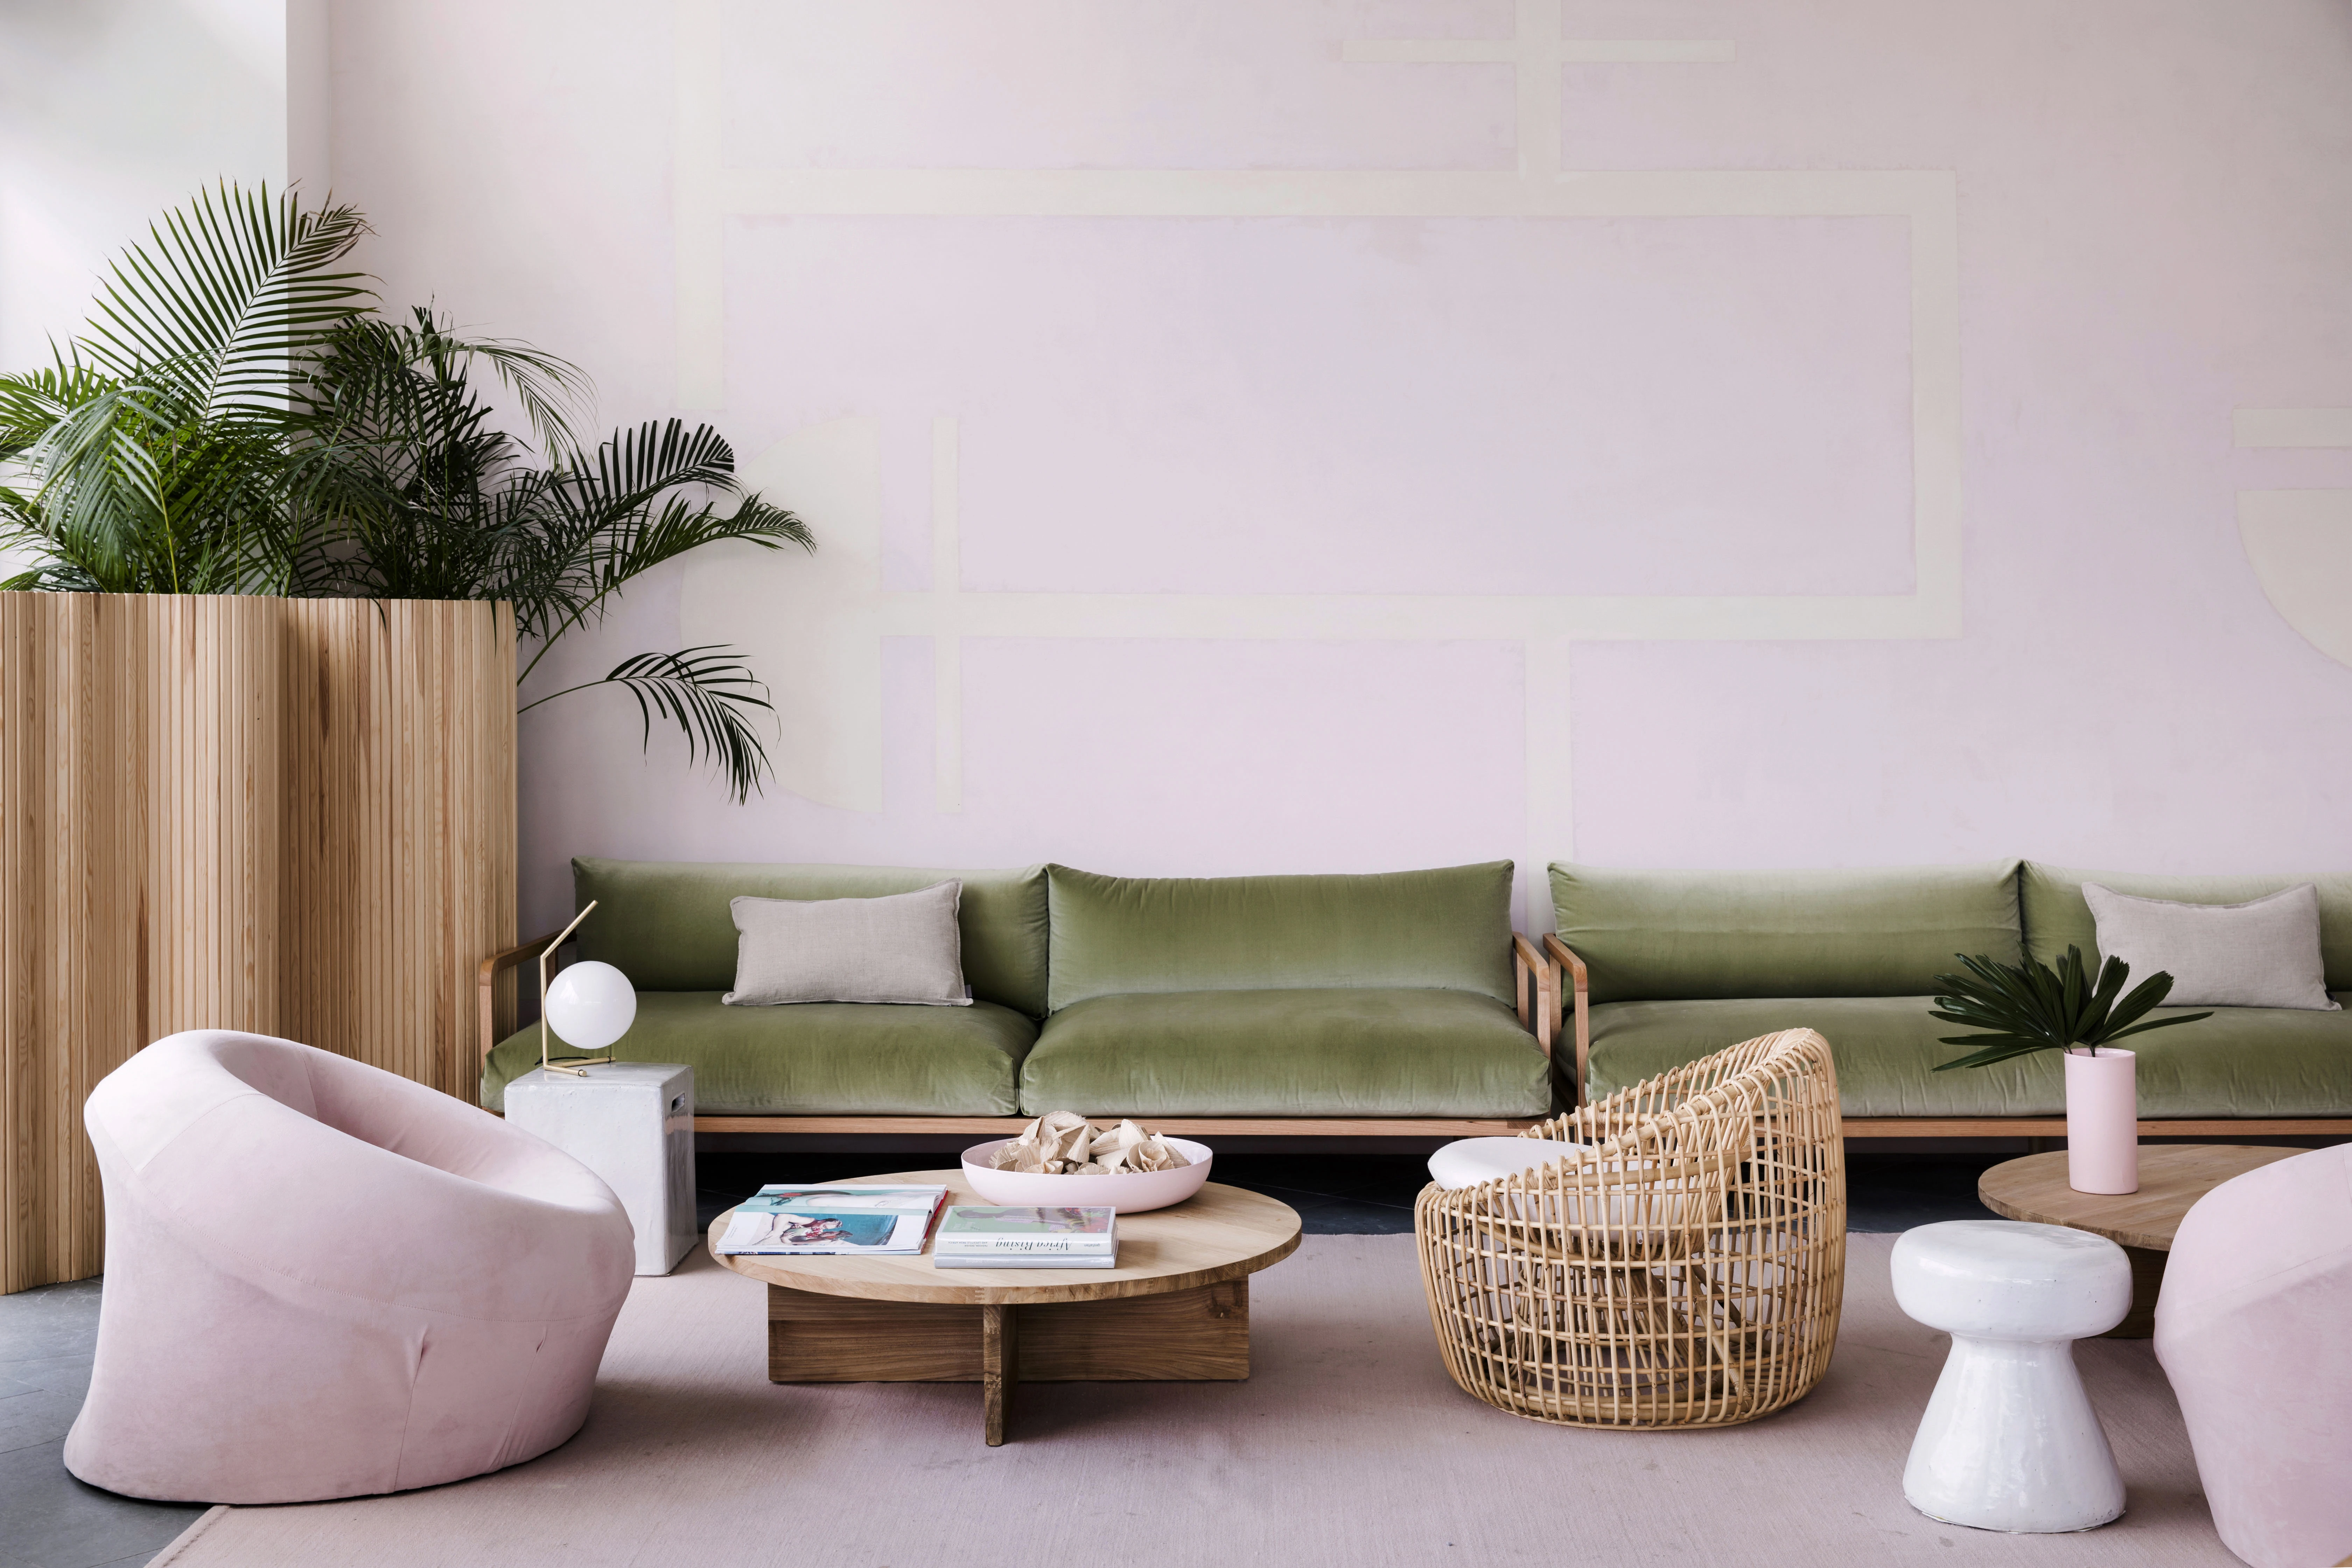 Green velvet couch and pink velvet modern armchairs in hotel lobby with pink walls and palm trees